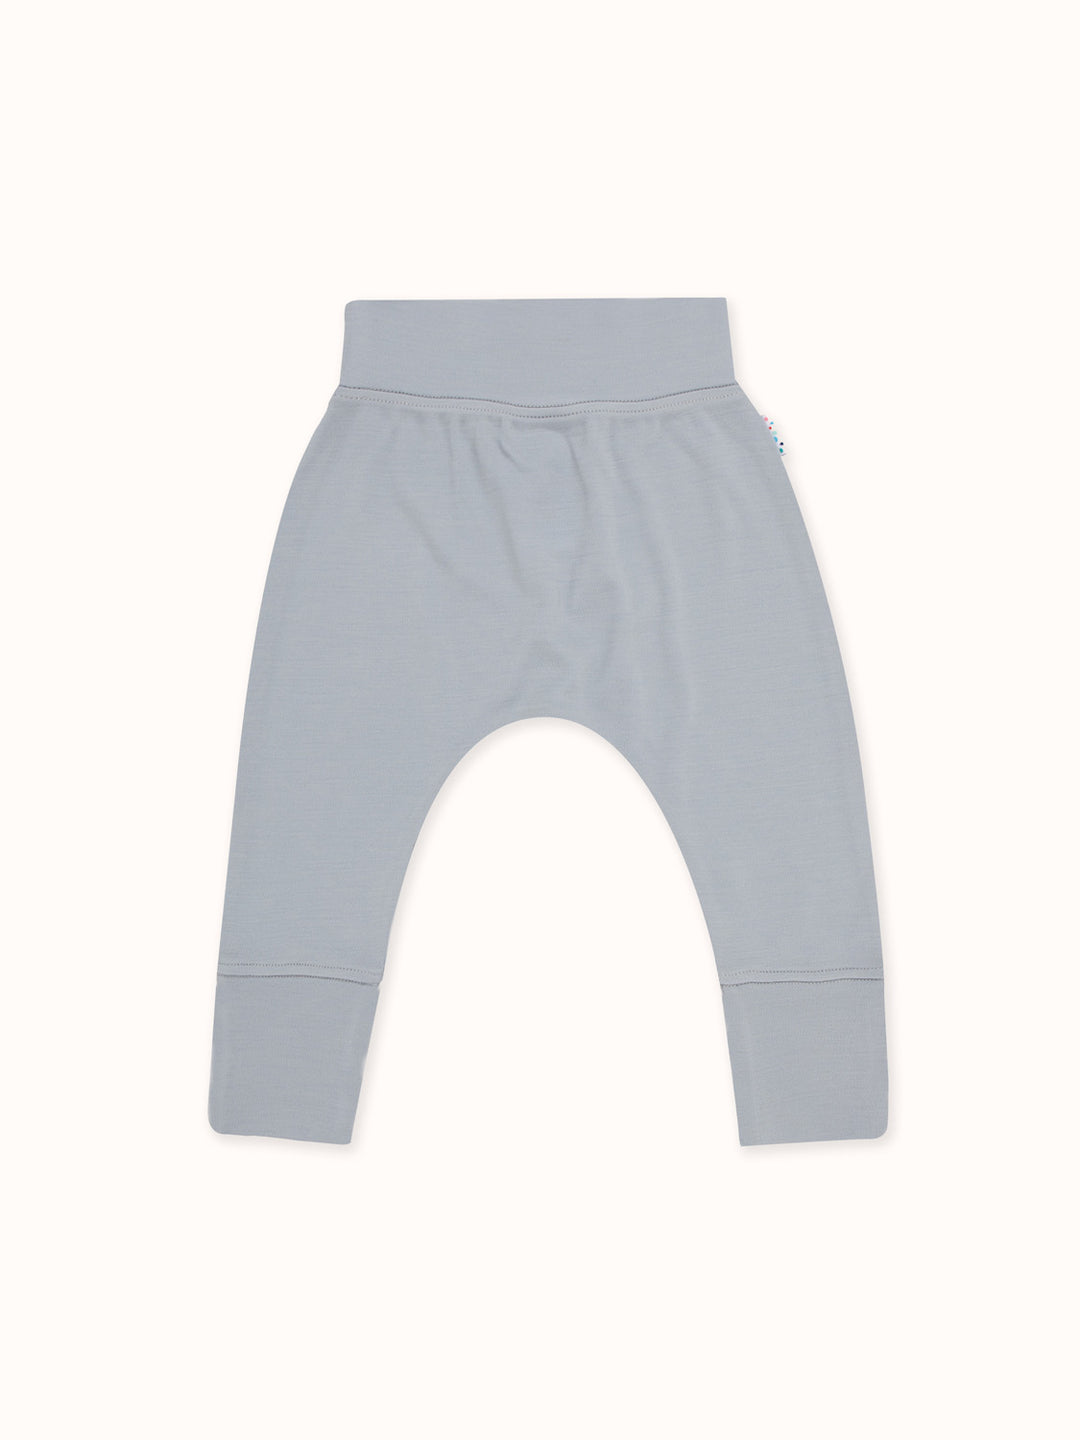 Imperfect Baby Merino Legging Imperfect Superlove Outlet Cloud Grey